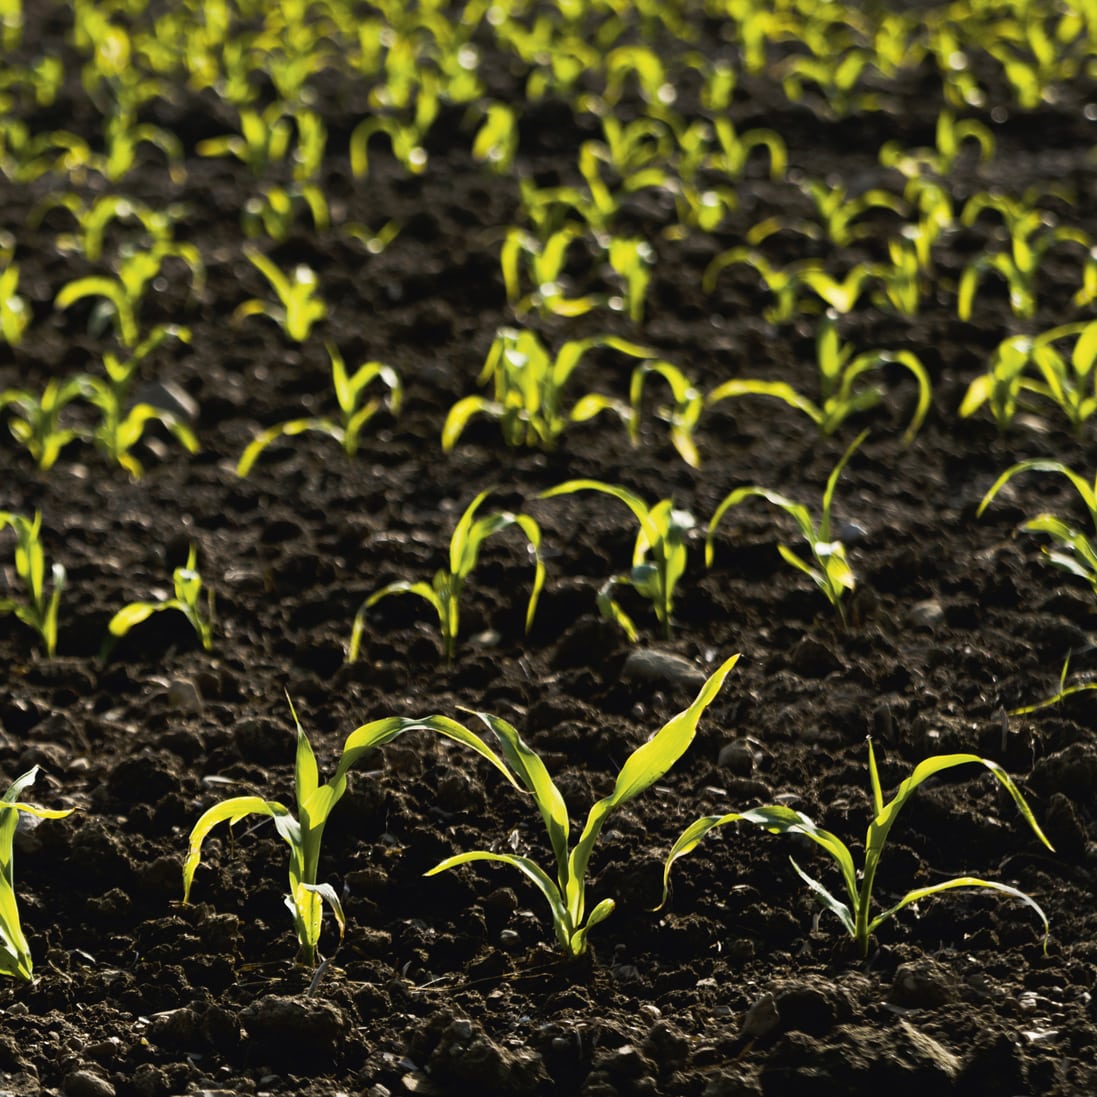 young corn plants in soil